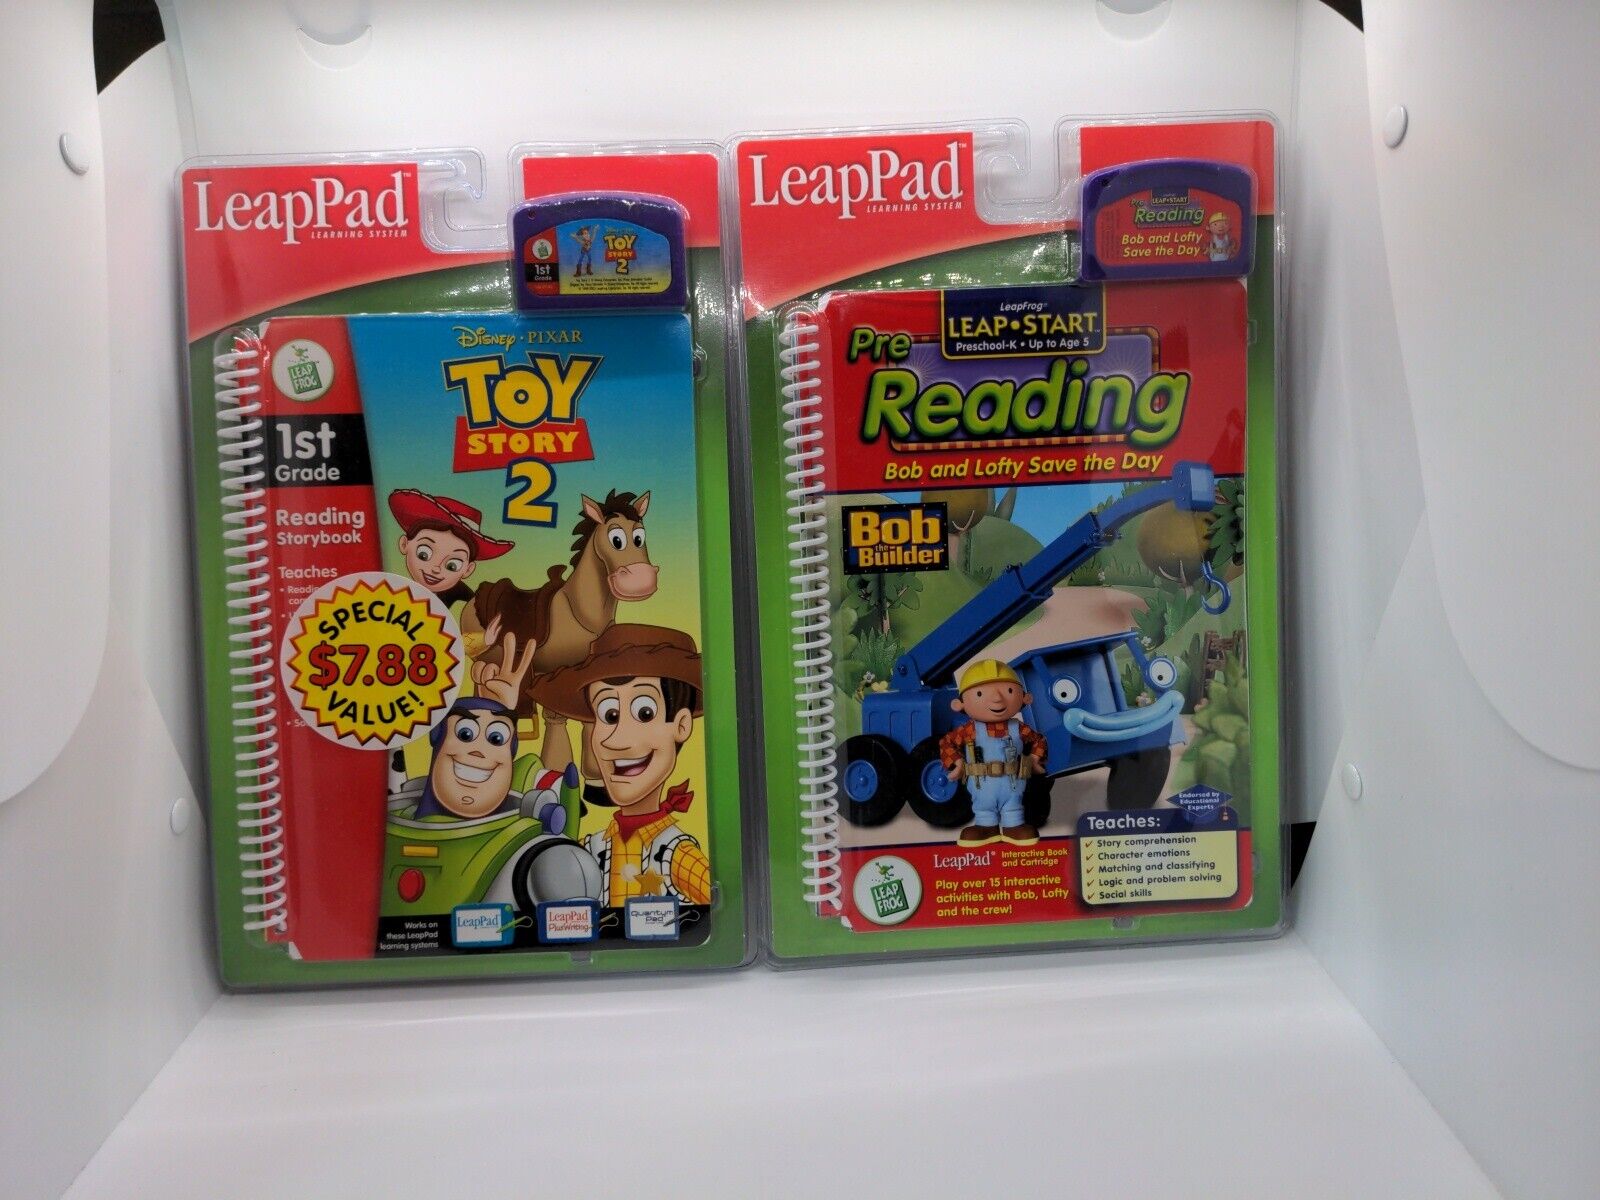 LeapFrog LeapPad Bob The Builder Bob and Lofty Save the Day & Toy Story 2 NEW